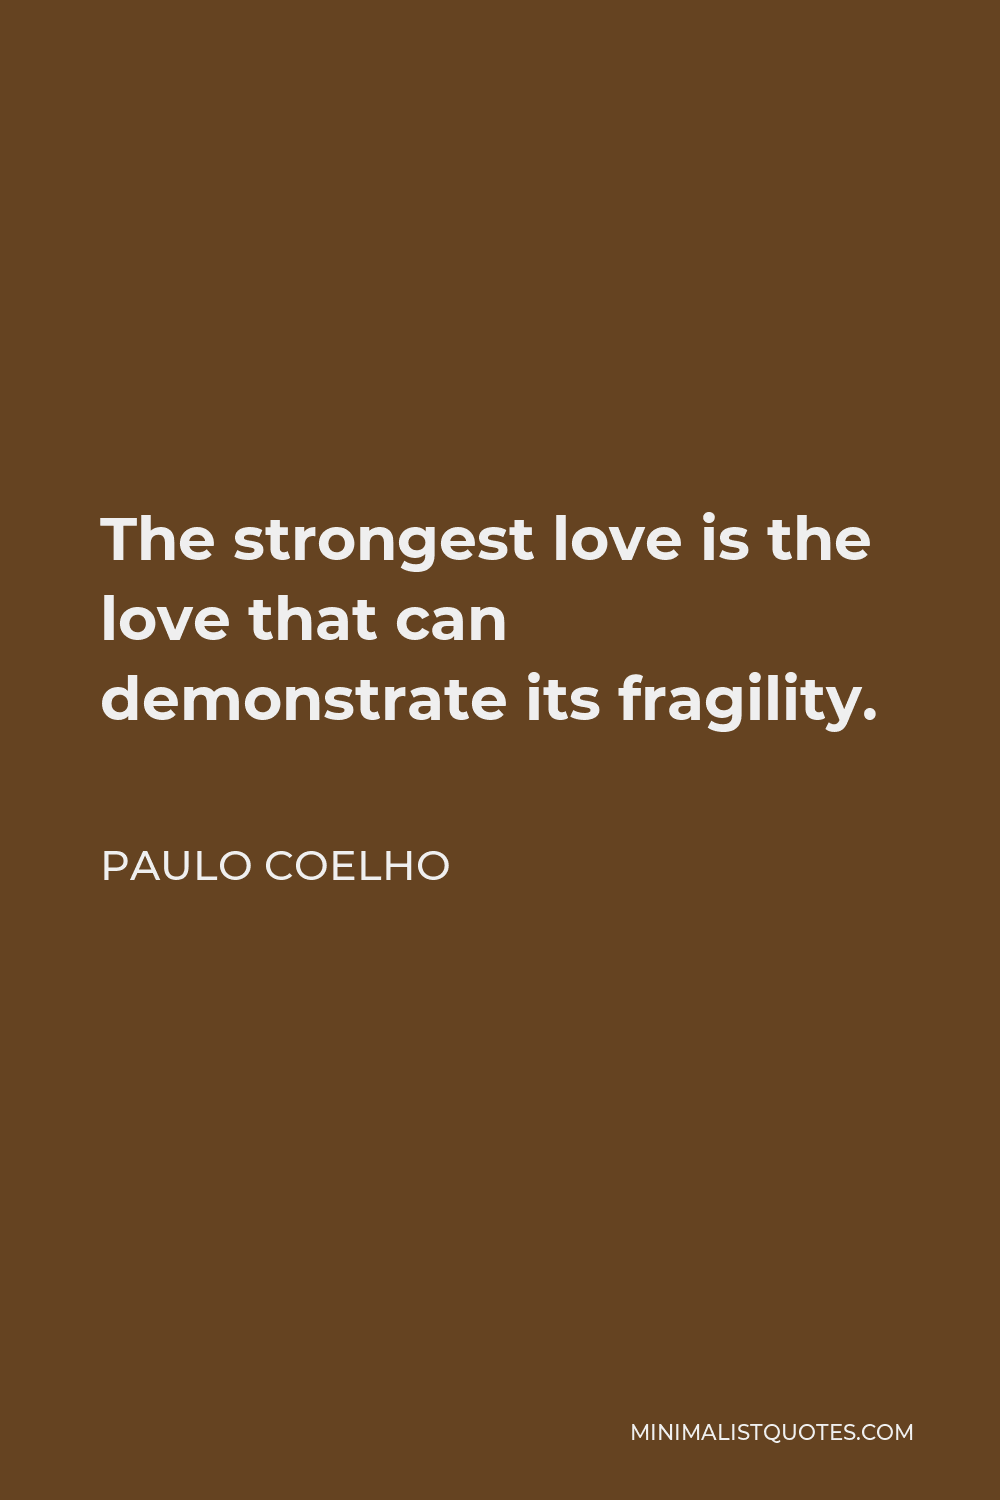 Paulo Coelho Quote - The strongest love is the love that can demonstrate its fragility.